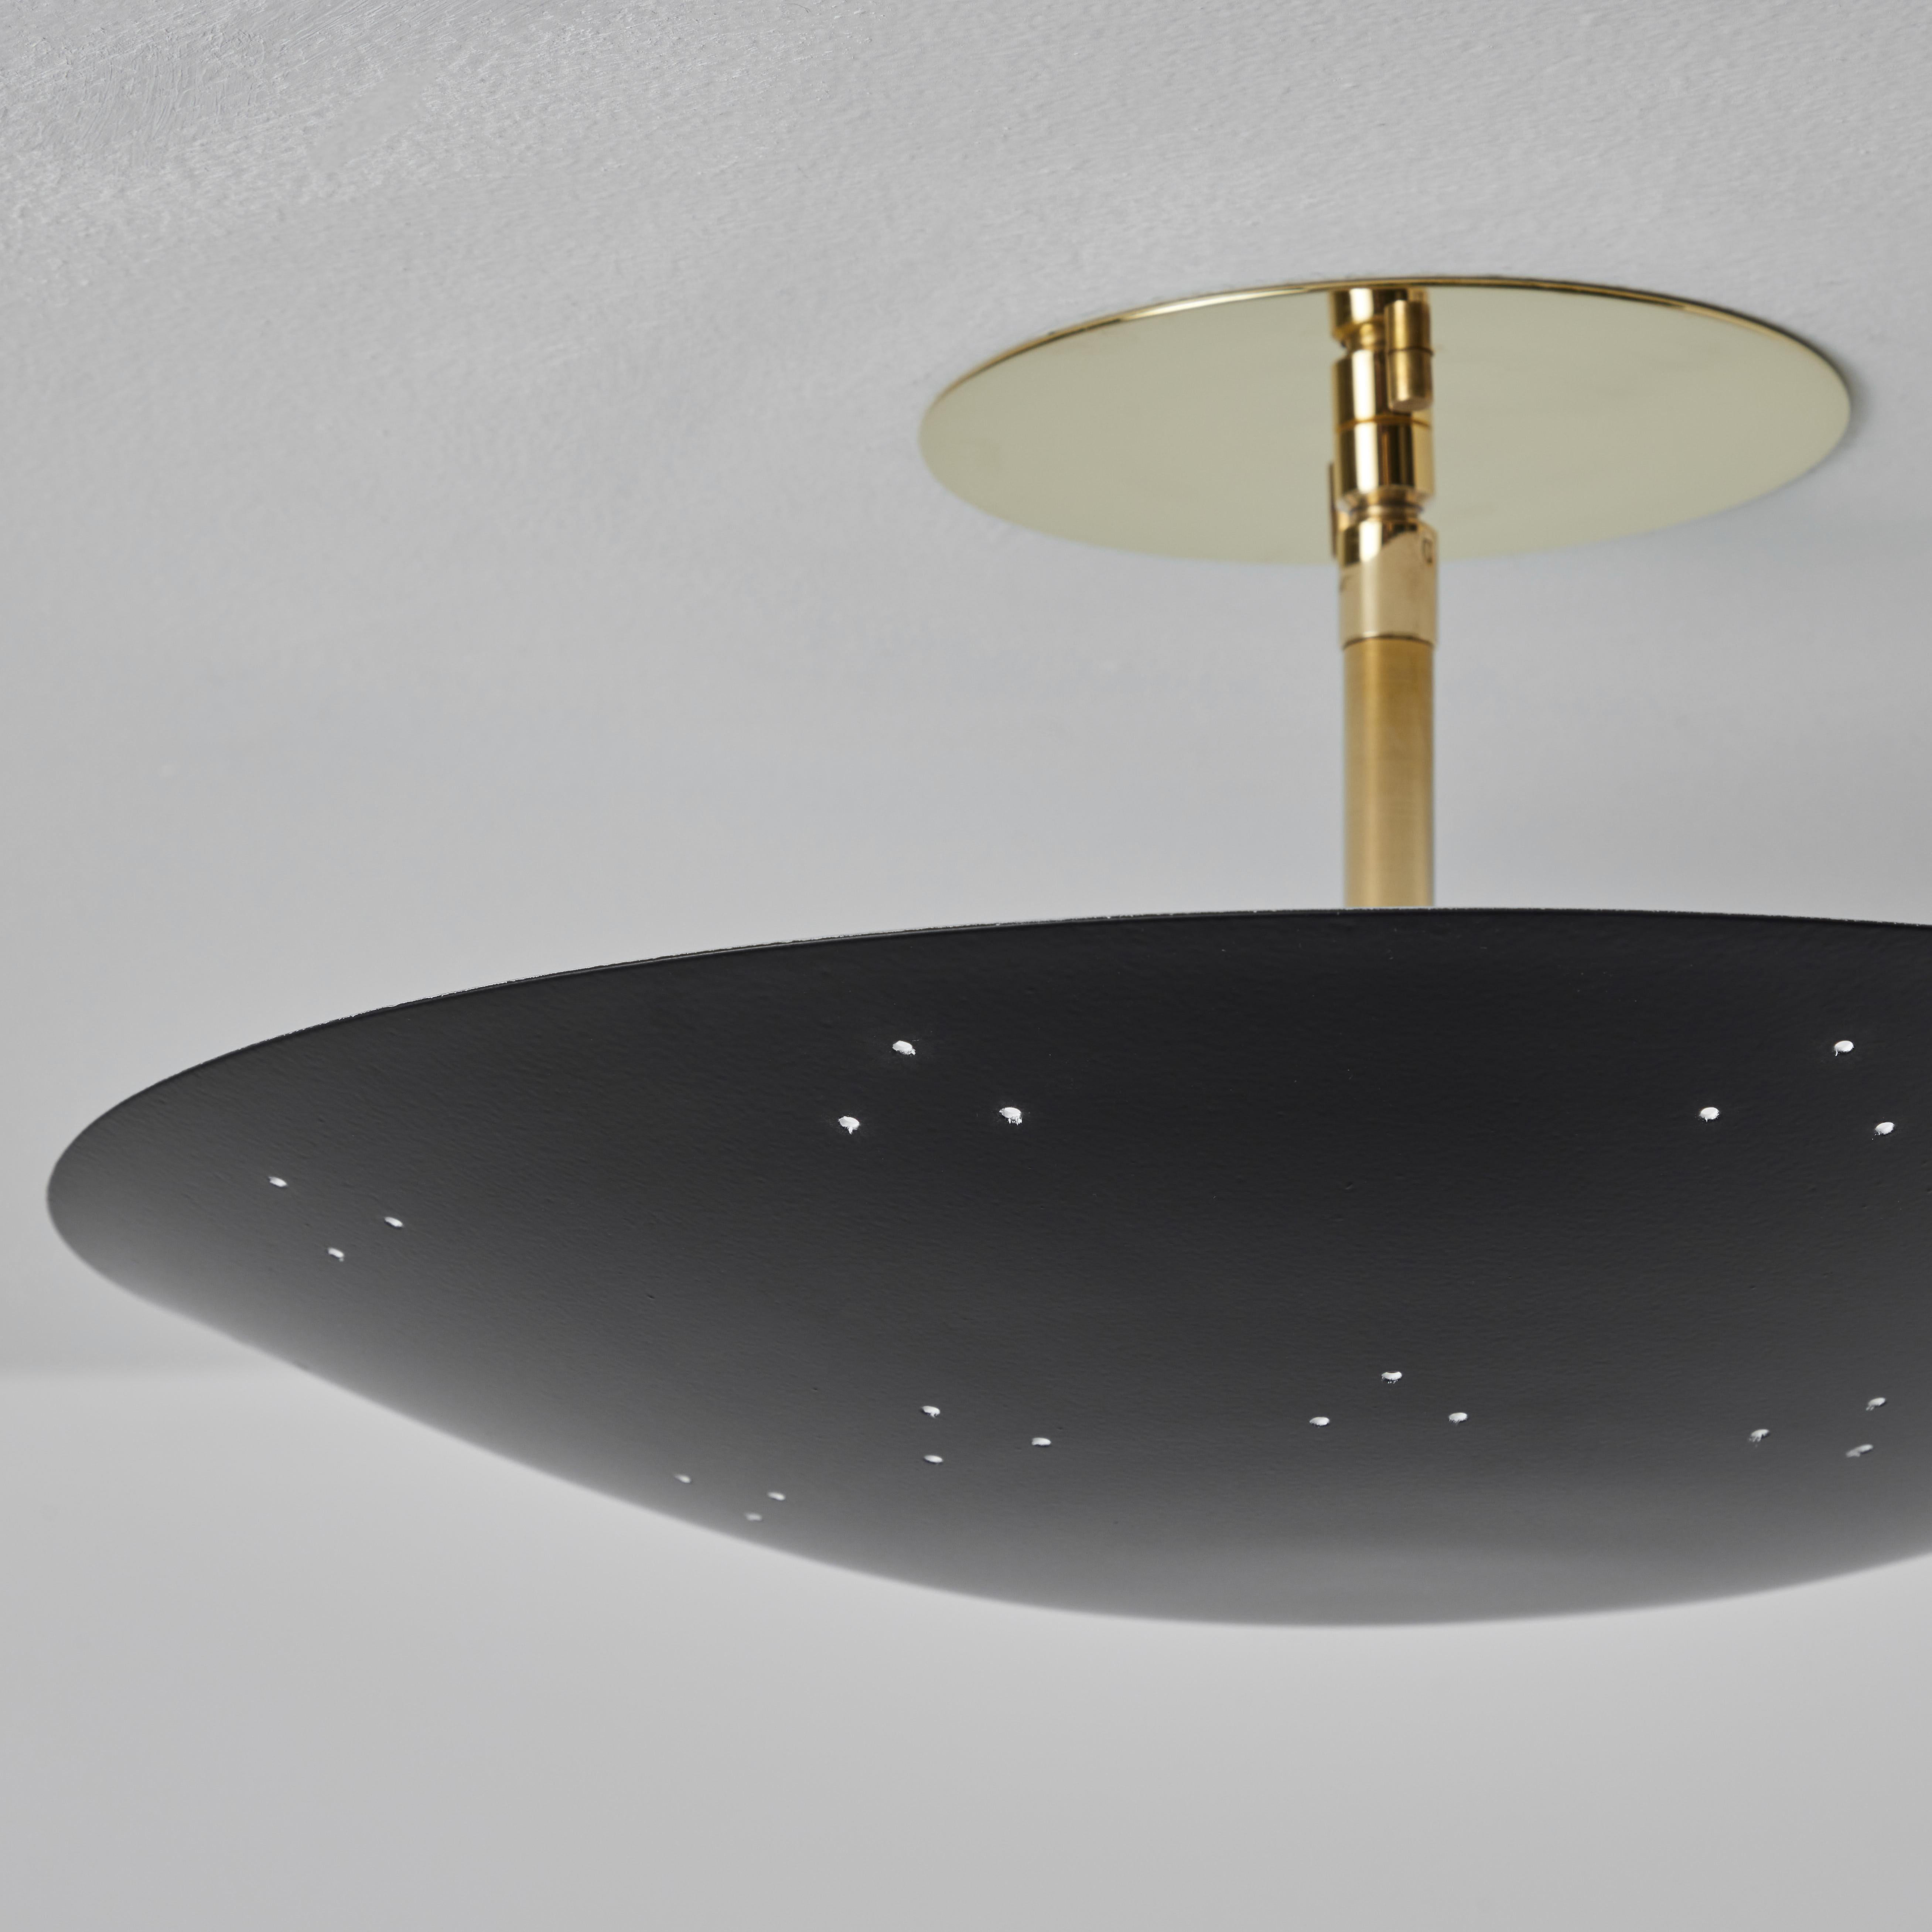 Two Enlighten 'Rey' Perforated Metal Dome ceiling lamp in Black. 
Hand-fabricated in Los Angeles, these highly refined ceiling lamps are reminiscent of the iconic mid-century Finnish designs of Paavo Tynell and Lisa Johansson Pape. Executed in black